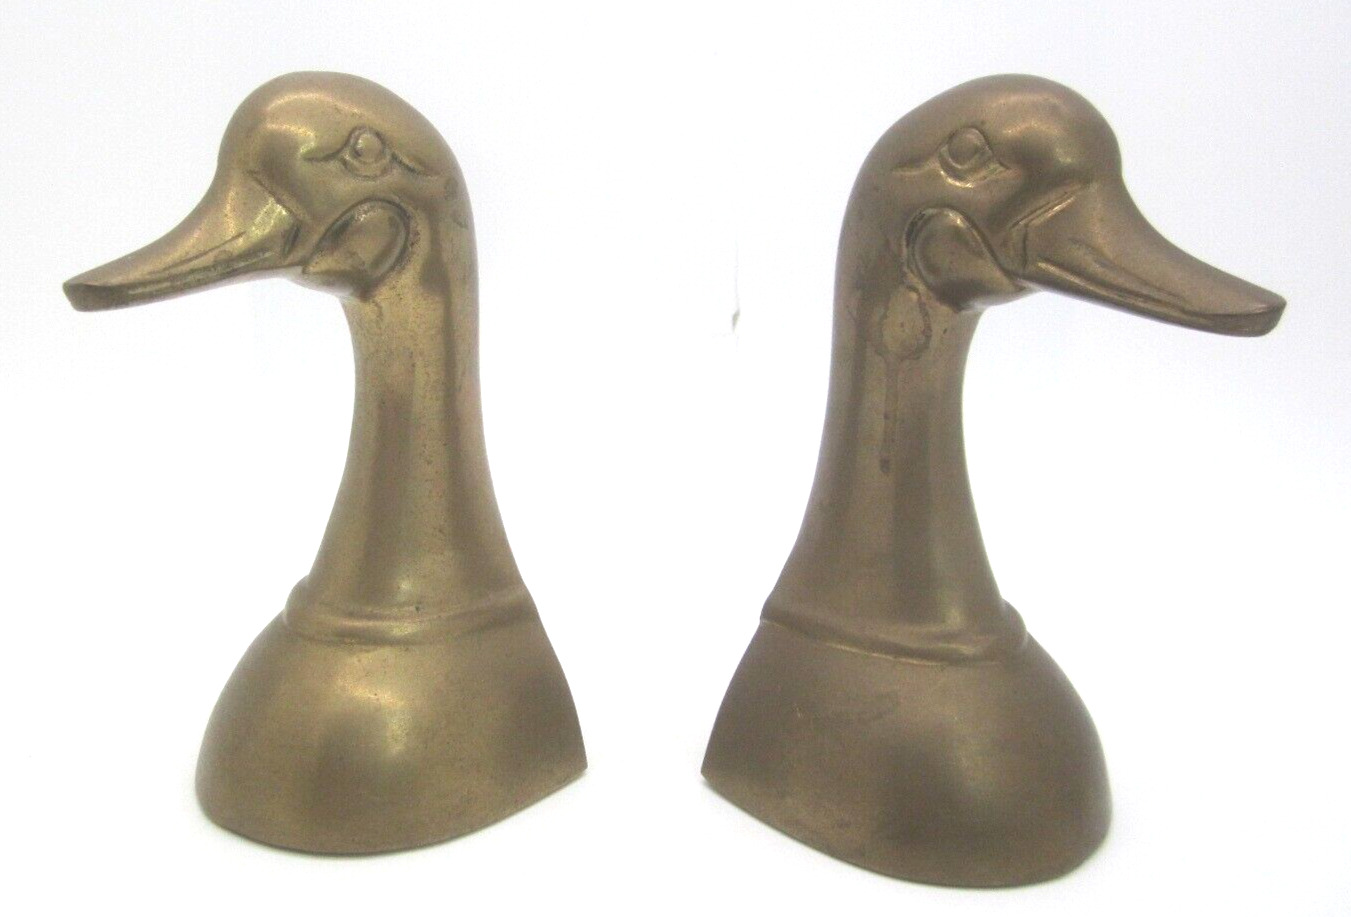 VTG Pair of Solid Brass Duck Mallard Bookends MCM Rustic Cabin Decor 6x3 Patina